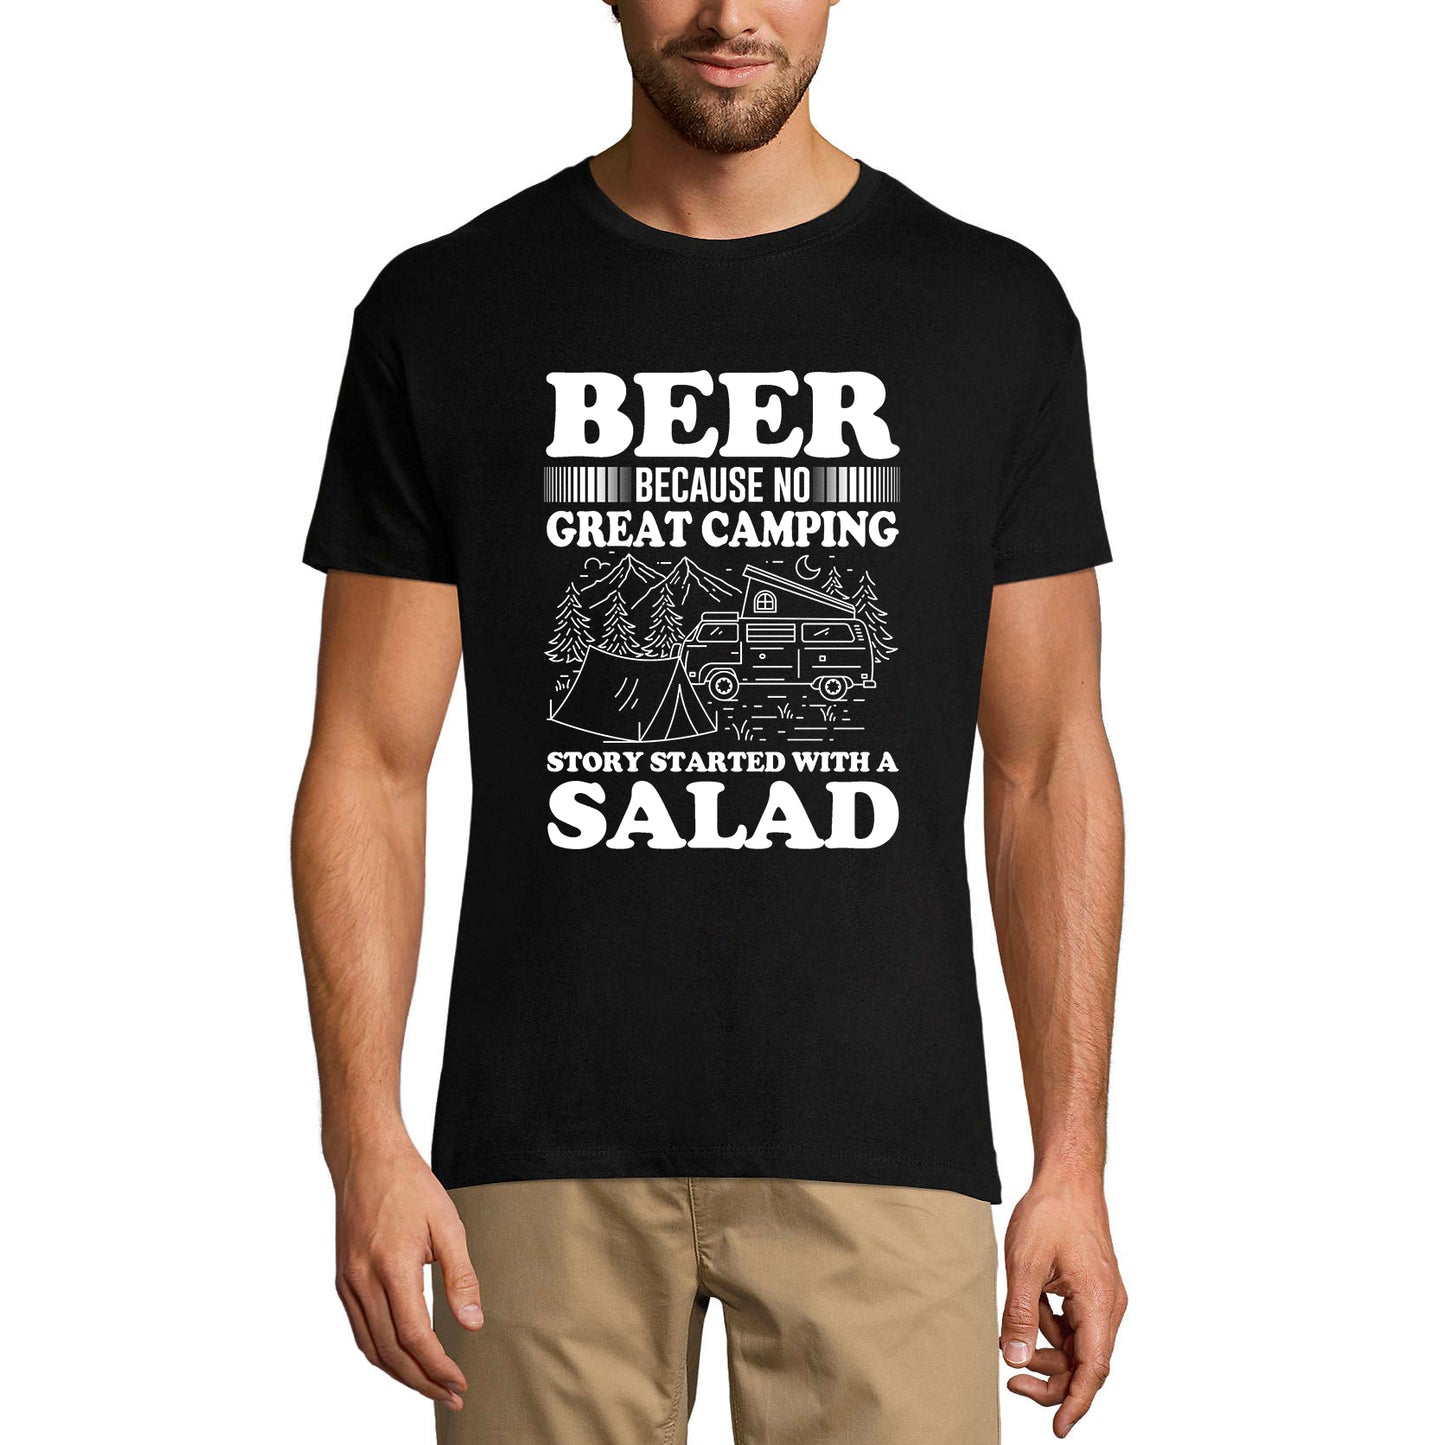 ULTRABASIC Men's T-Shirt Beer Because No Great Camping Story Started With a Salad - Beer Lover Tee Shirt